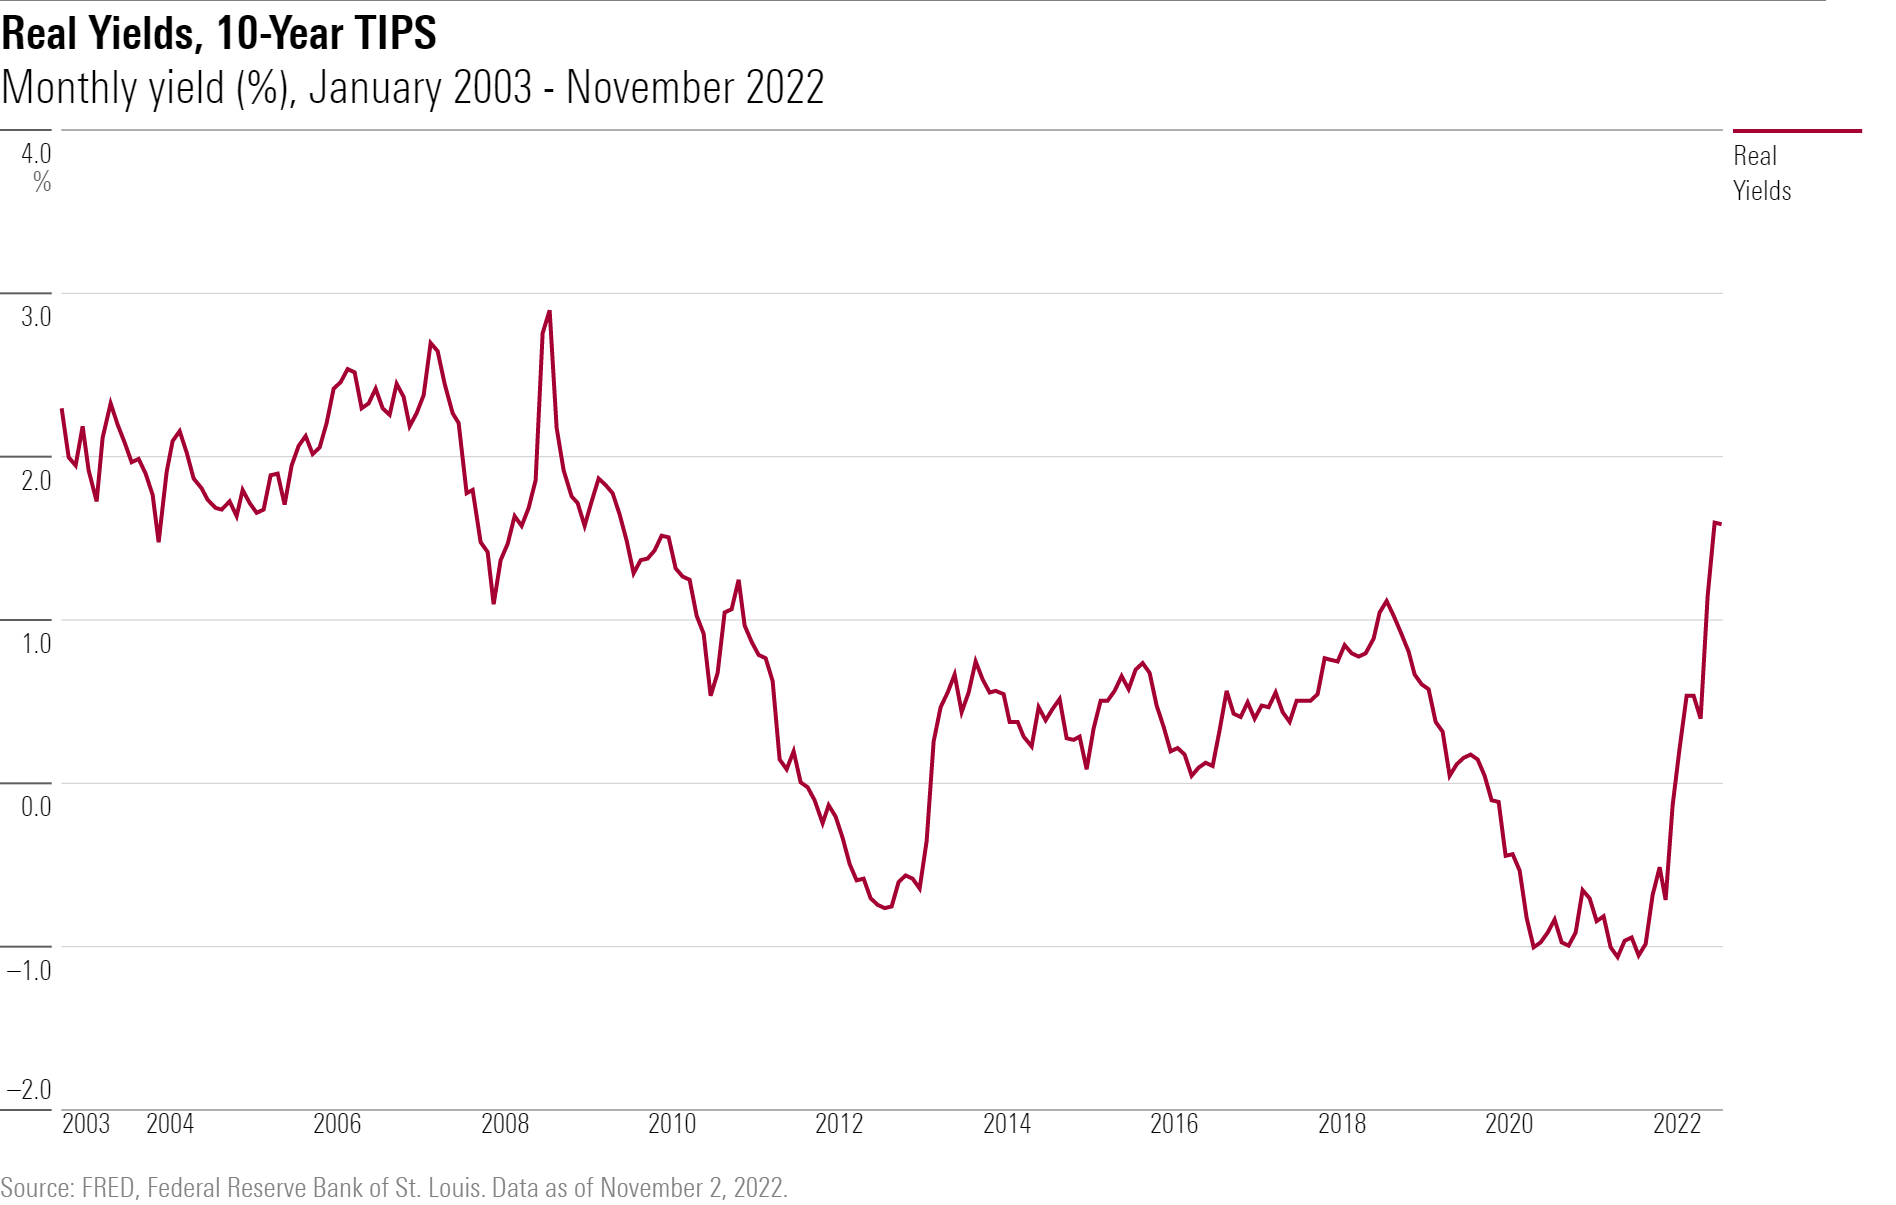 The monthly real yields for 10-year TIPS, from January 2003 through November 2022.